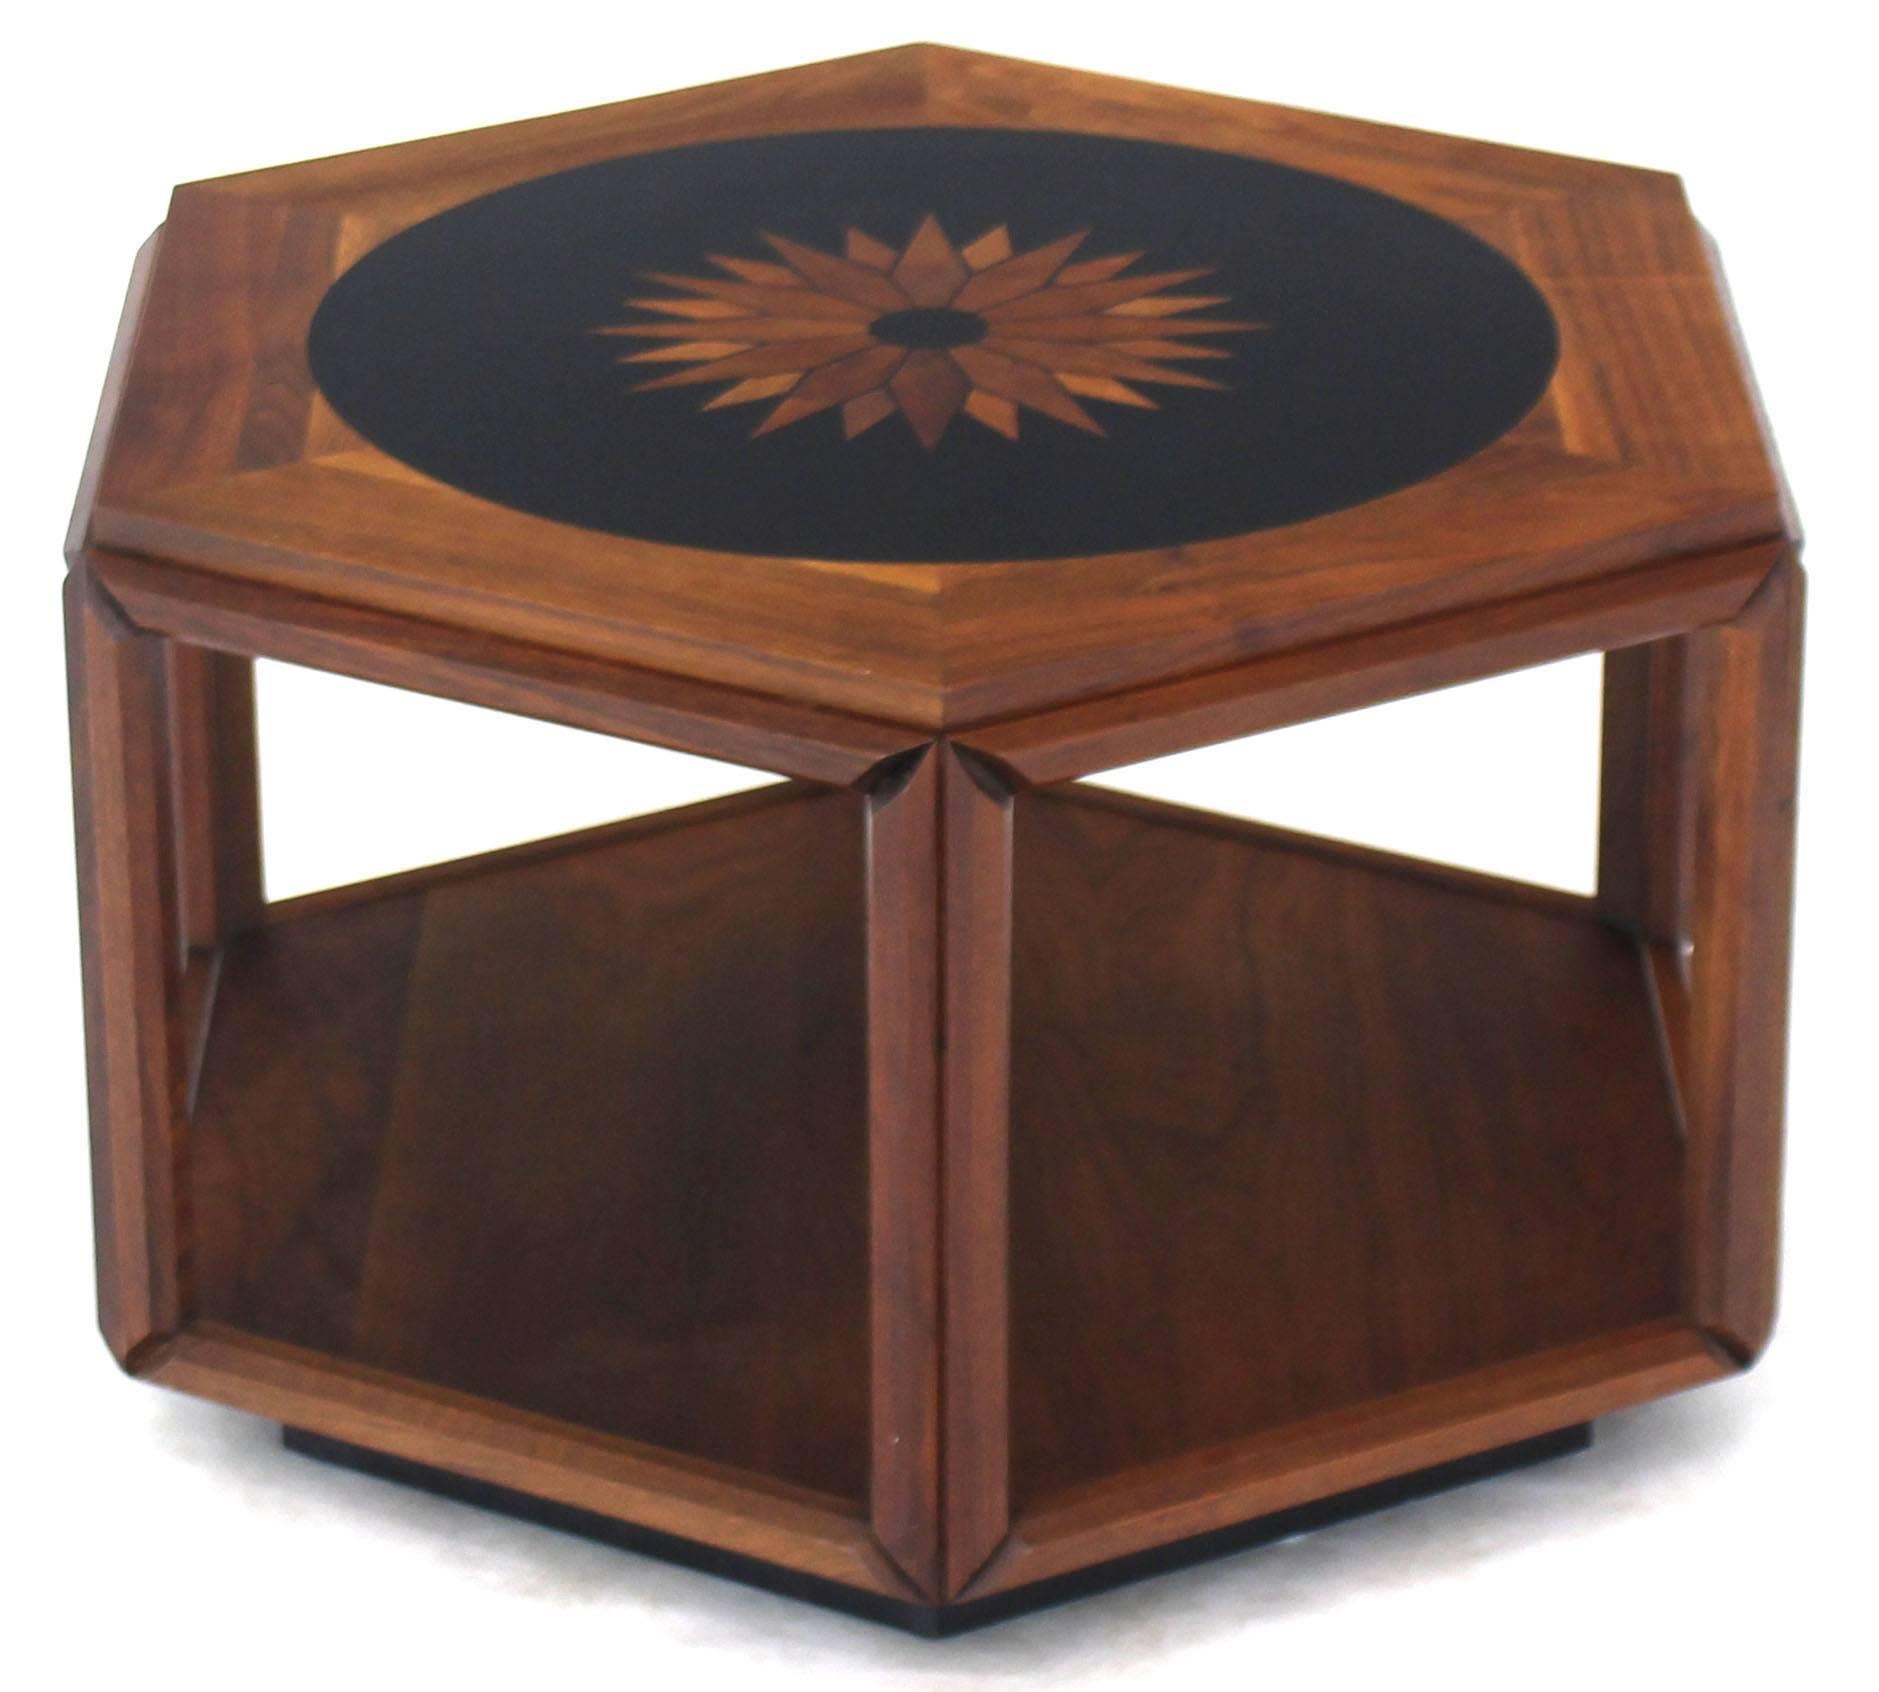 Oiled walnut hexagonal centre side table by John Keal for Brown Saltman.
High quality walnut wood in combination with high quality Mid-Century Modern craftsmanship accent table. Natural oil finish.
  